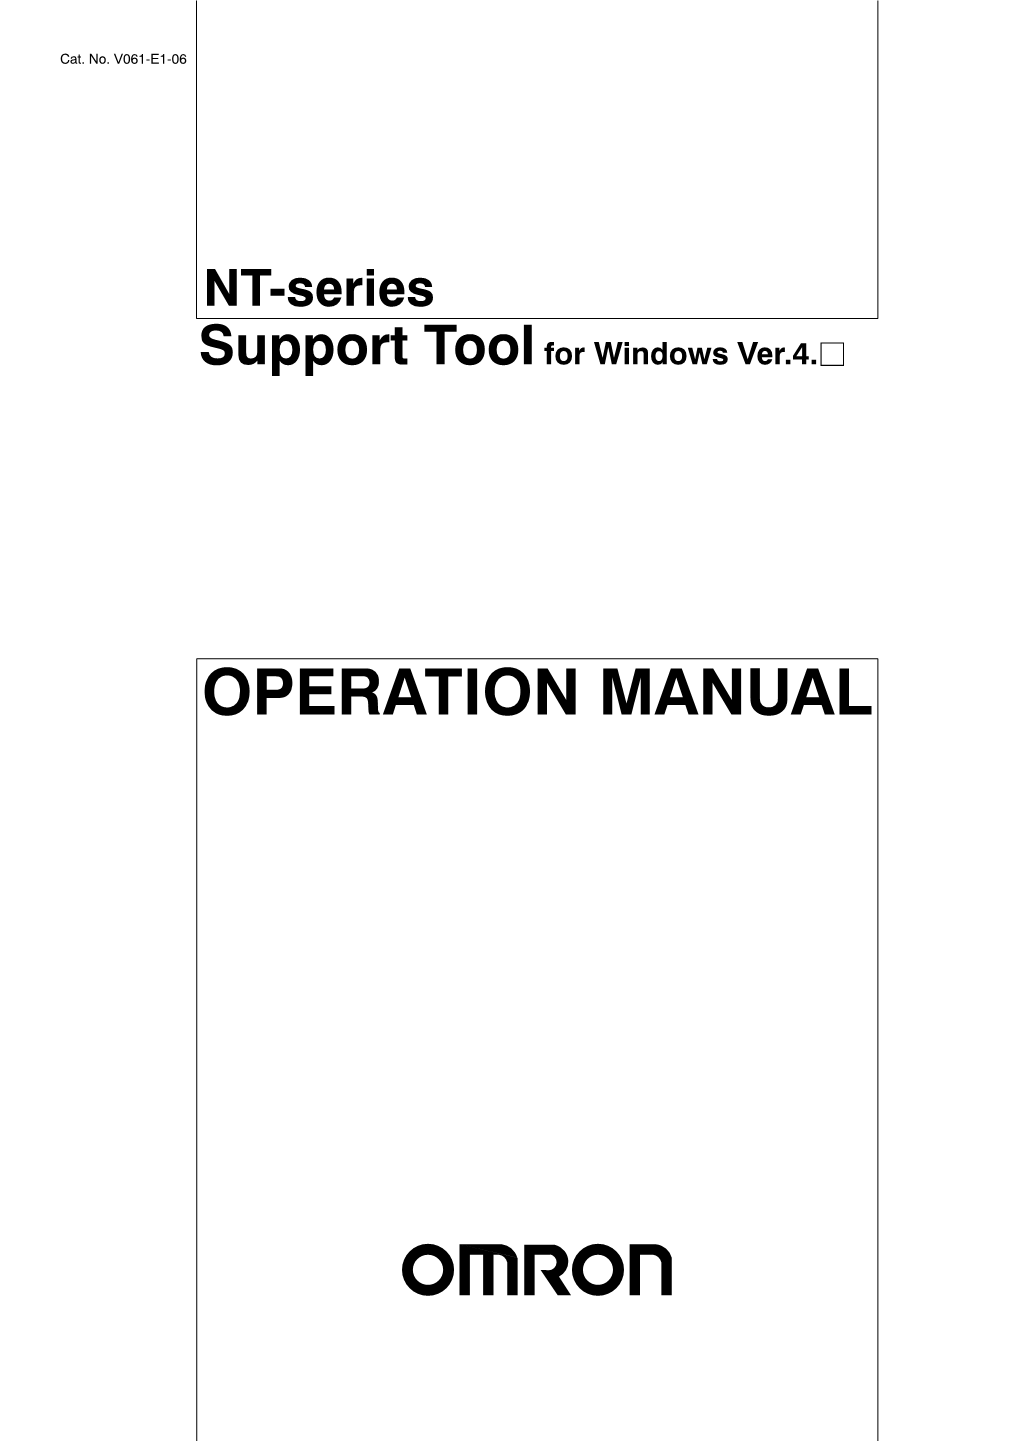 NT-Series Support Tool for Windows Ver. 4. Operation Manual